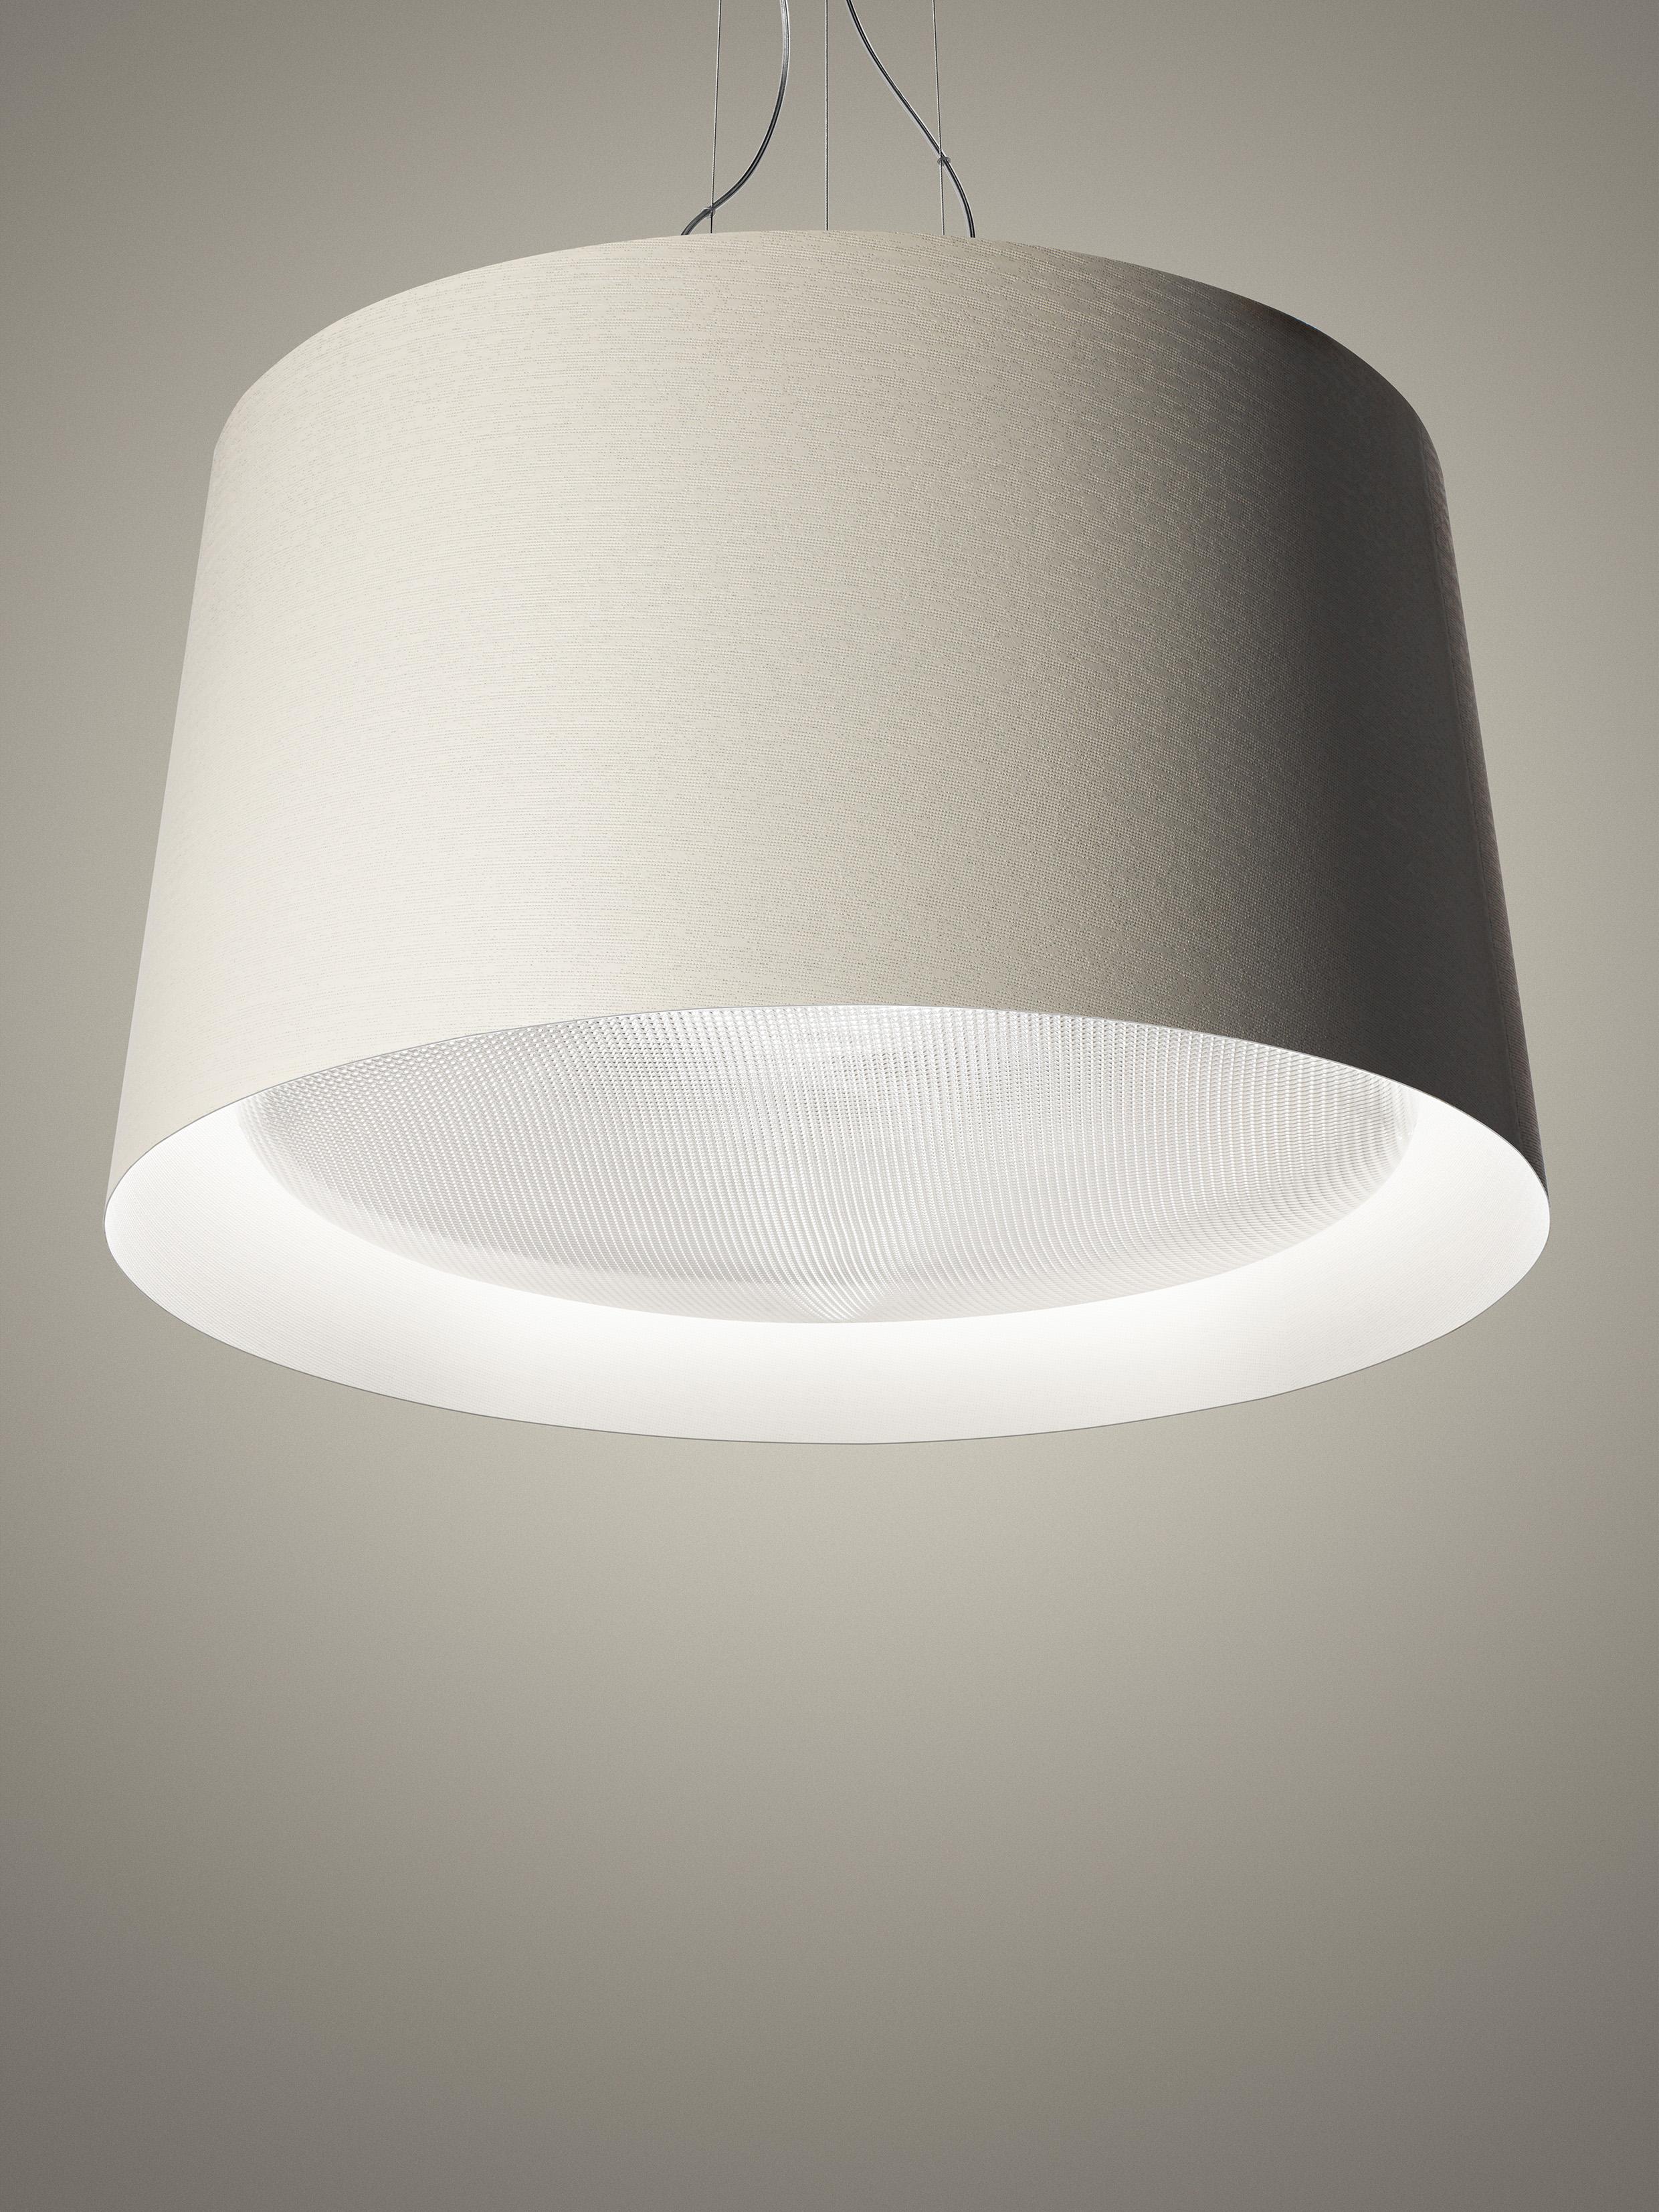 Large suspension lamp with direct and indirect up light. Diffuser made of fiberglass-based composite material and liquid coated. The lamp body consists of a large painted aluminum cone. The diffuser which tops o¬ the cone, where one of the two LED